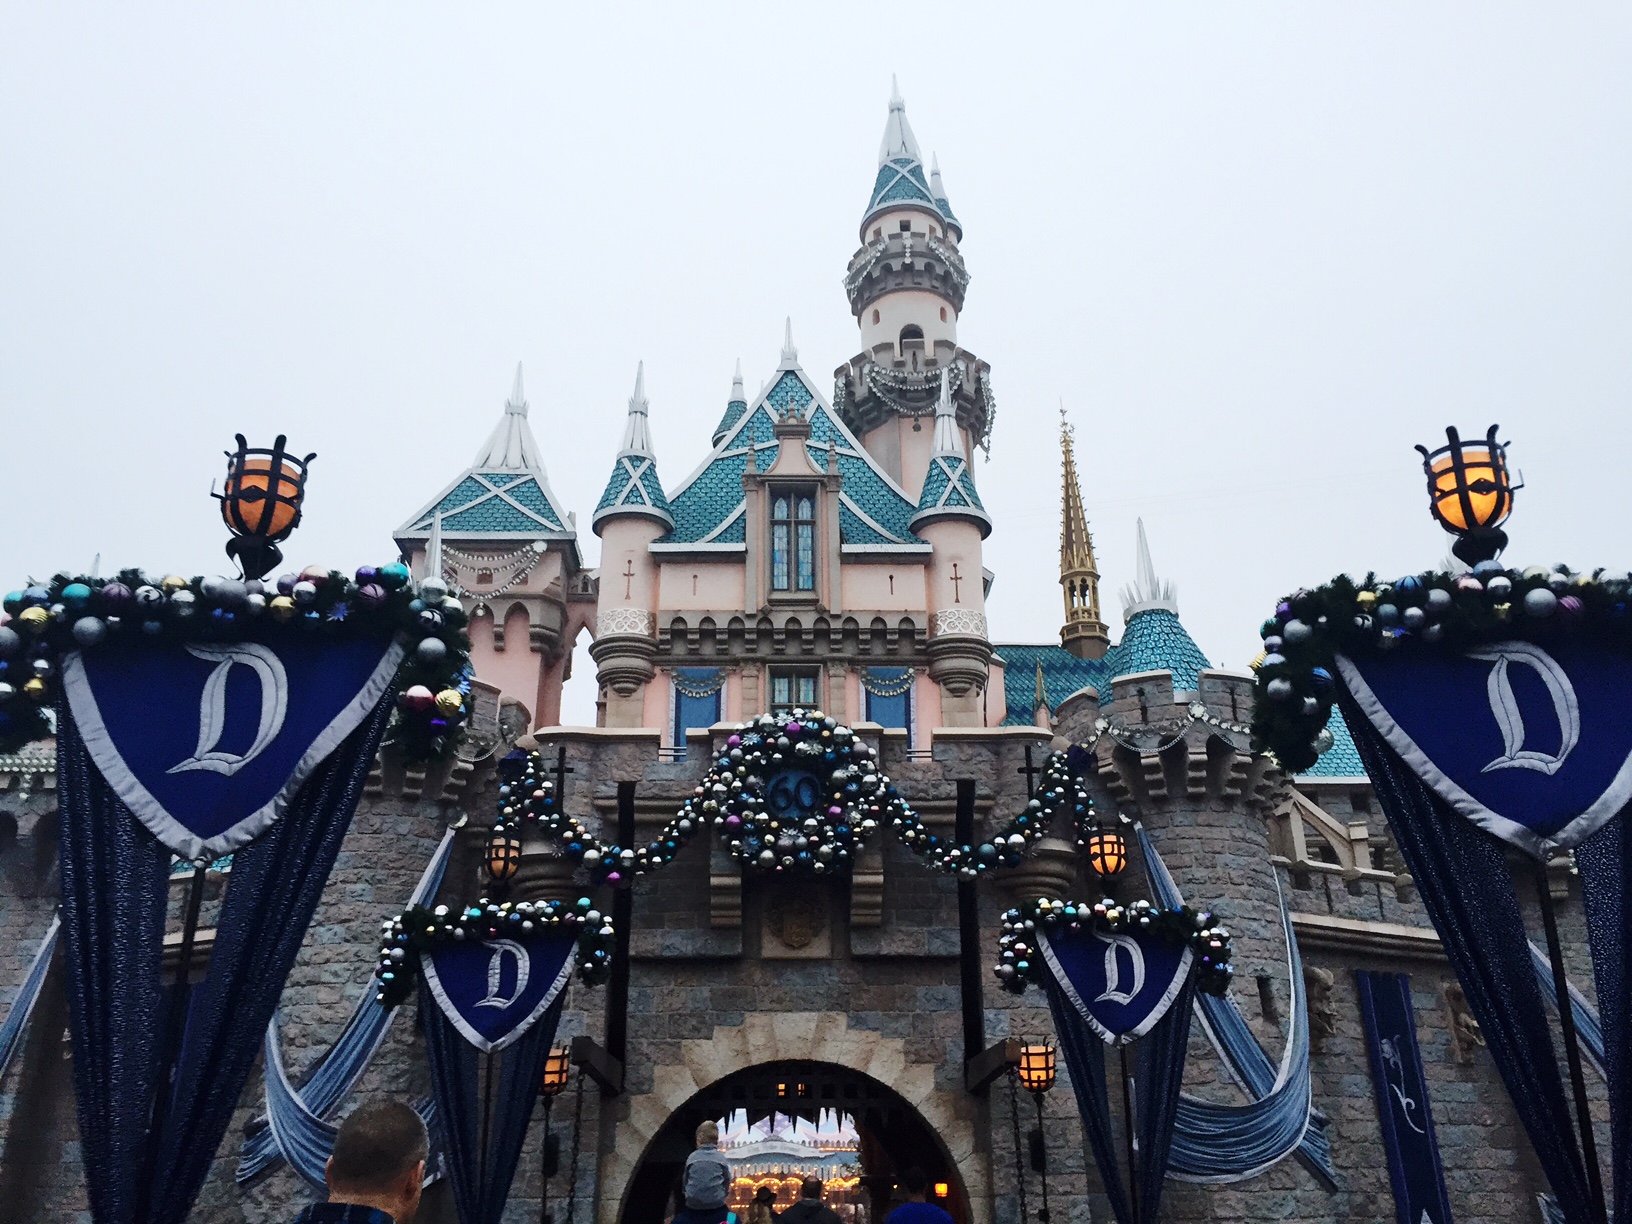 LAST Chance for the Best Price on 3-Day DIsneyland Resort Park Hopper Tickets!!